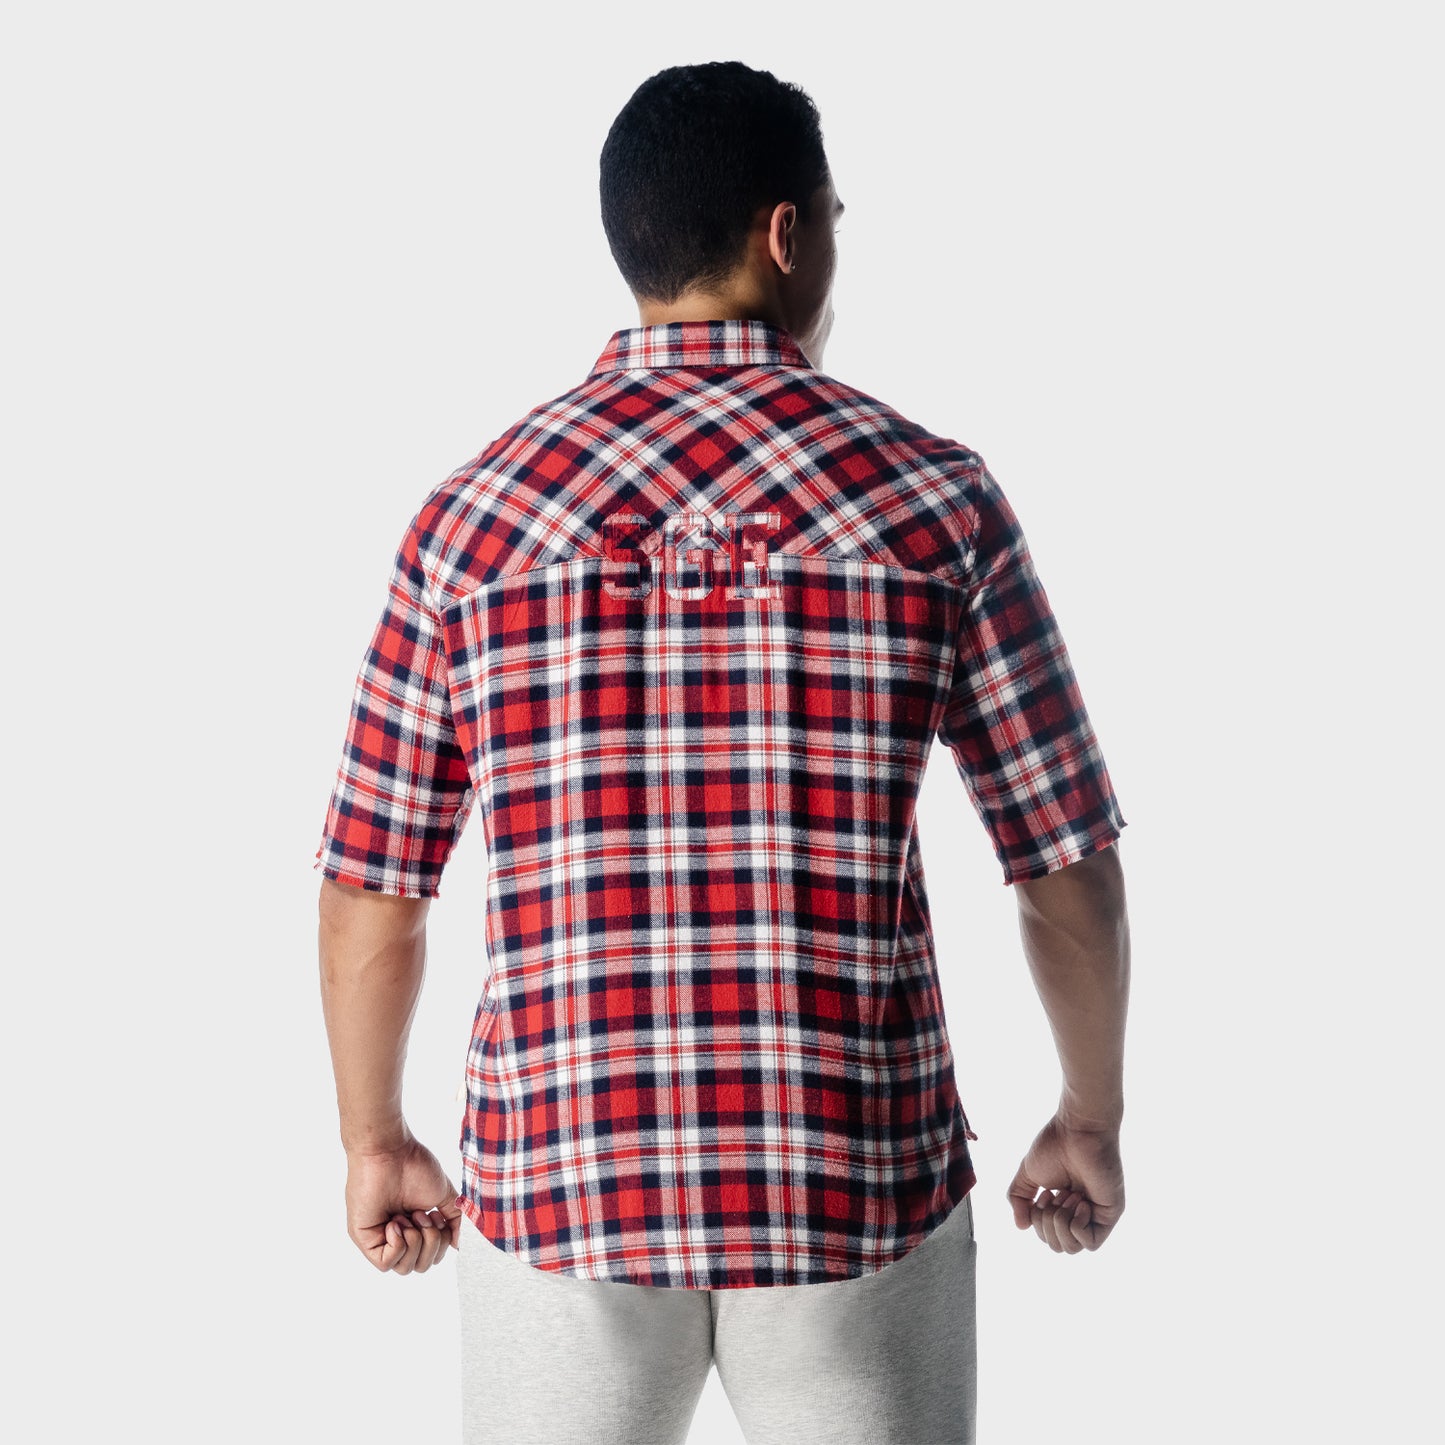 squatwolf-workout-shirts-golden-era-flannel-shirt-red-check-workout-clothes-for-men